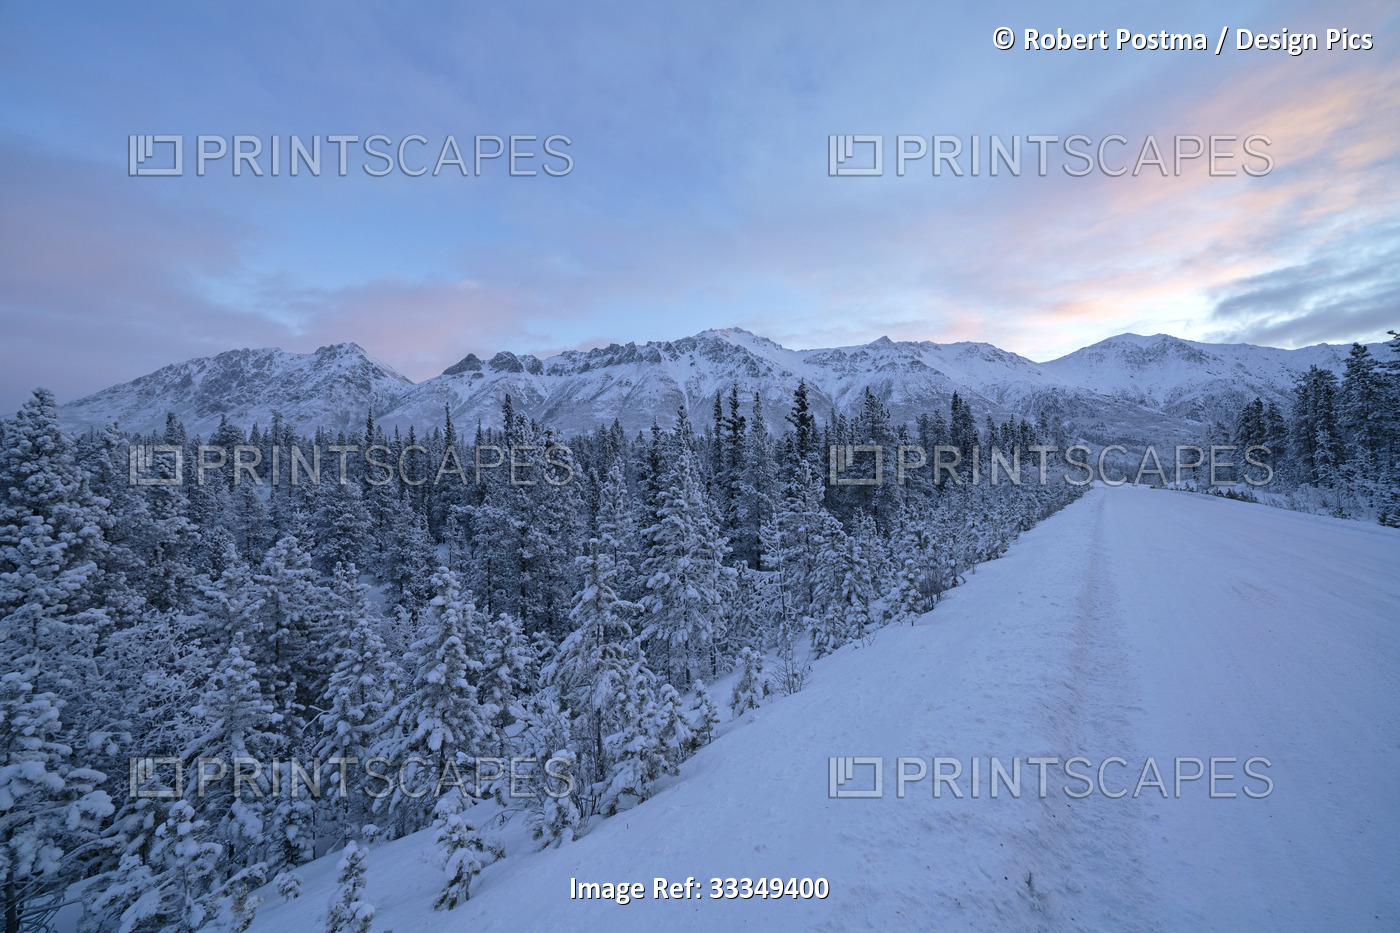 The Alaska Highway stretching into the distance with the morning light rising ...